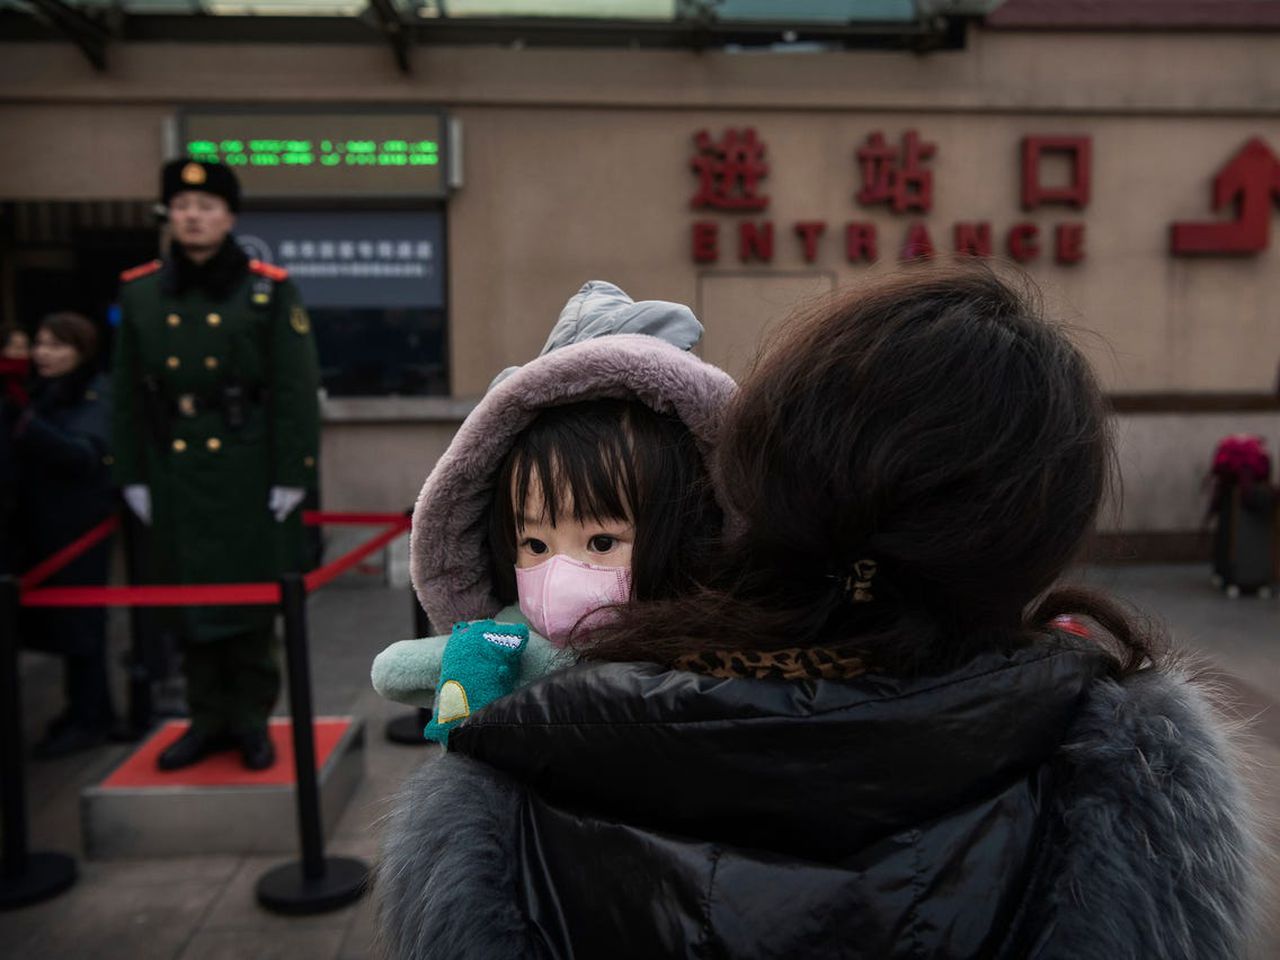 Coronavirus death toll jumps to 170 in China with 7,700 infected. Image via Business Insider.